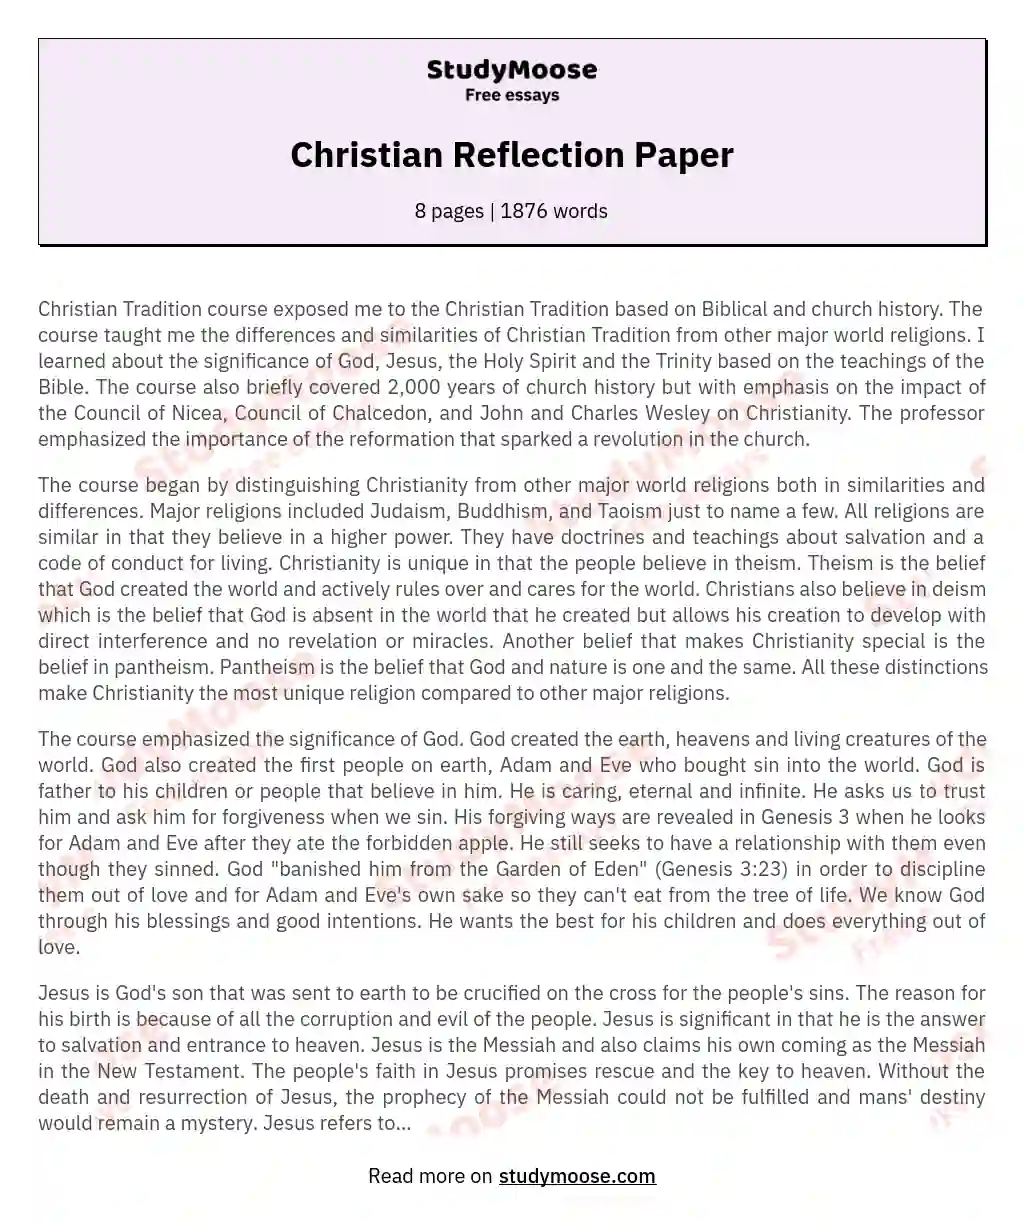 Christian Reflection Paper essay